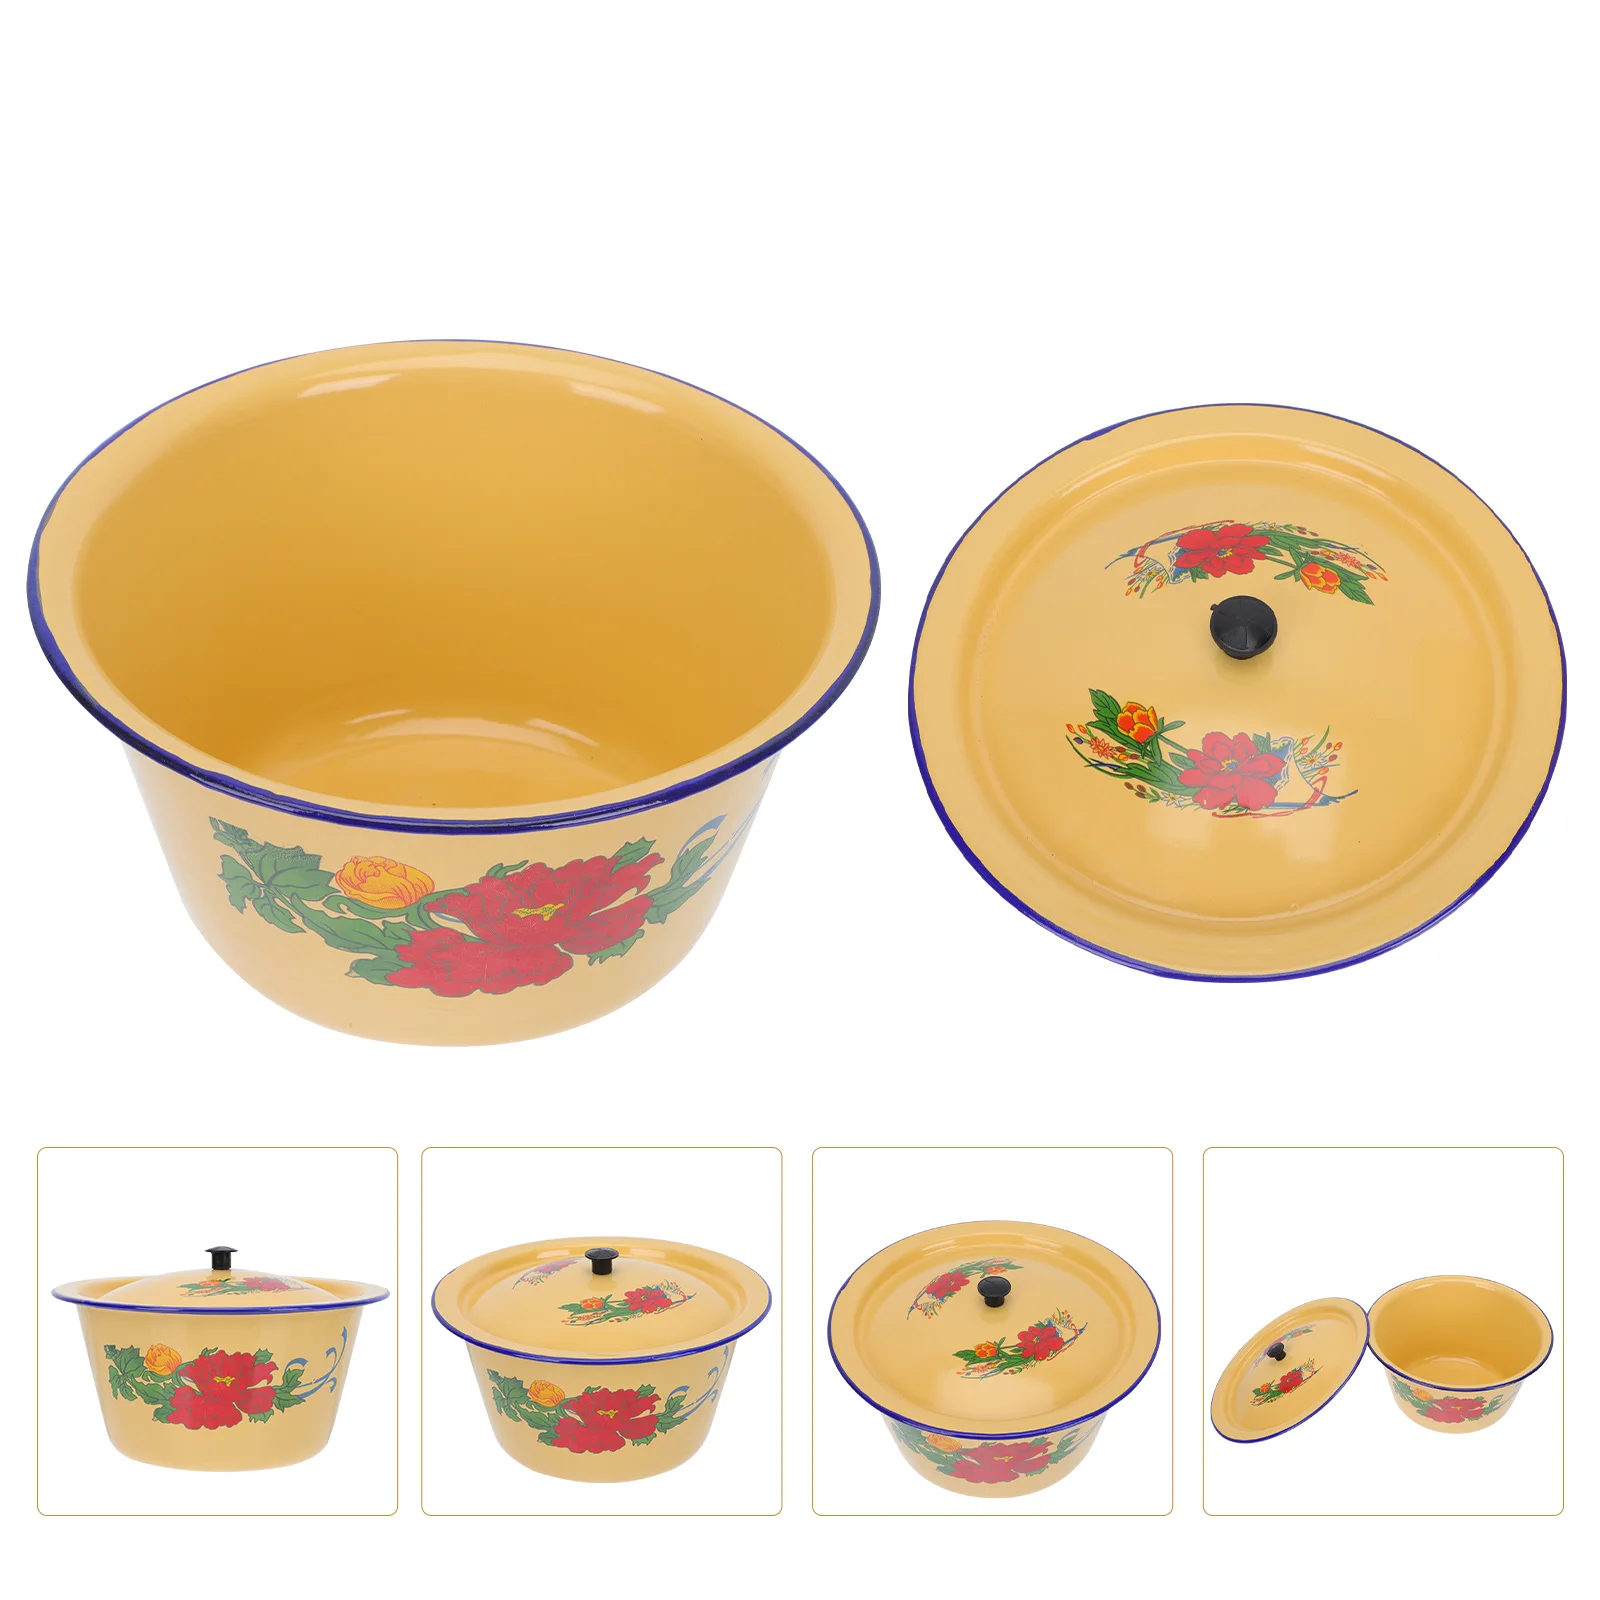 

Bowl Enamel Bowls Vintage Serving Salad Soup Grease Metal Mixing Enamelware Basin Cover Kitchen Cooking Container Can Washing